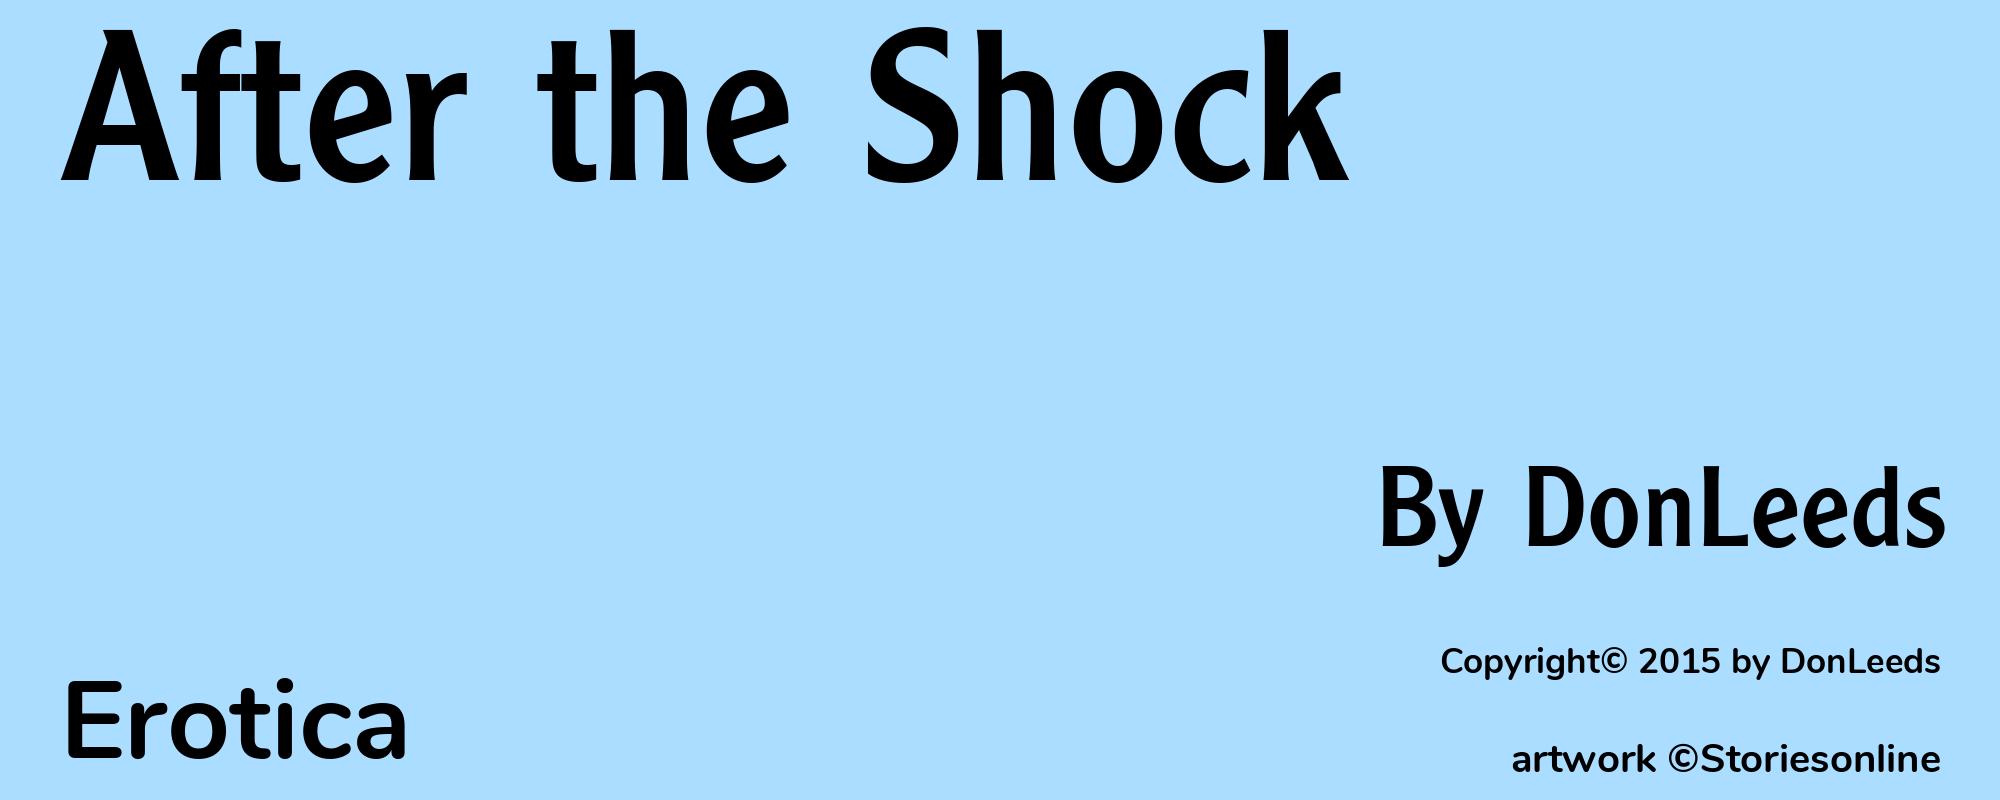 After the Shock - Cover